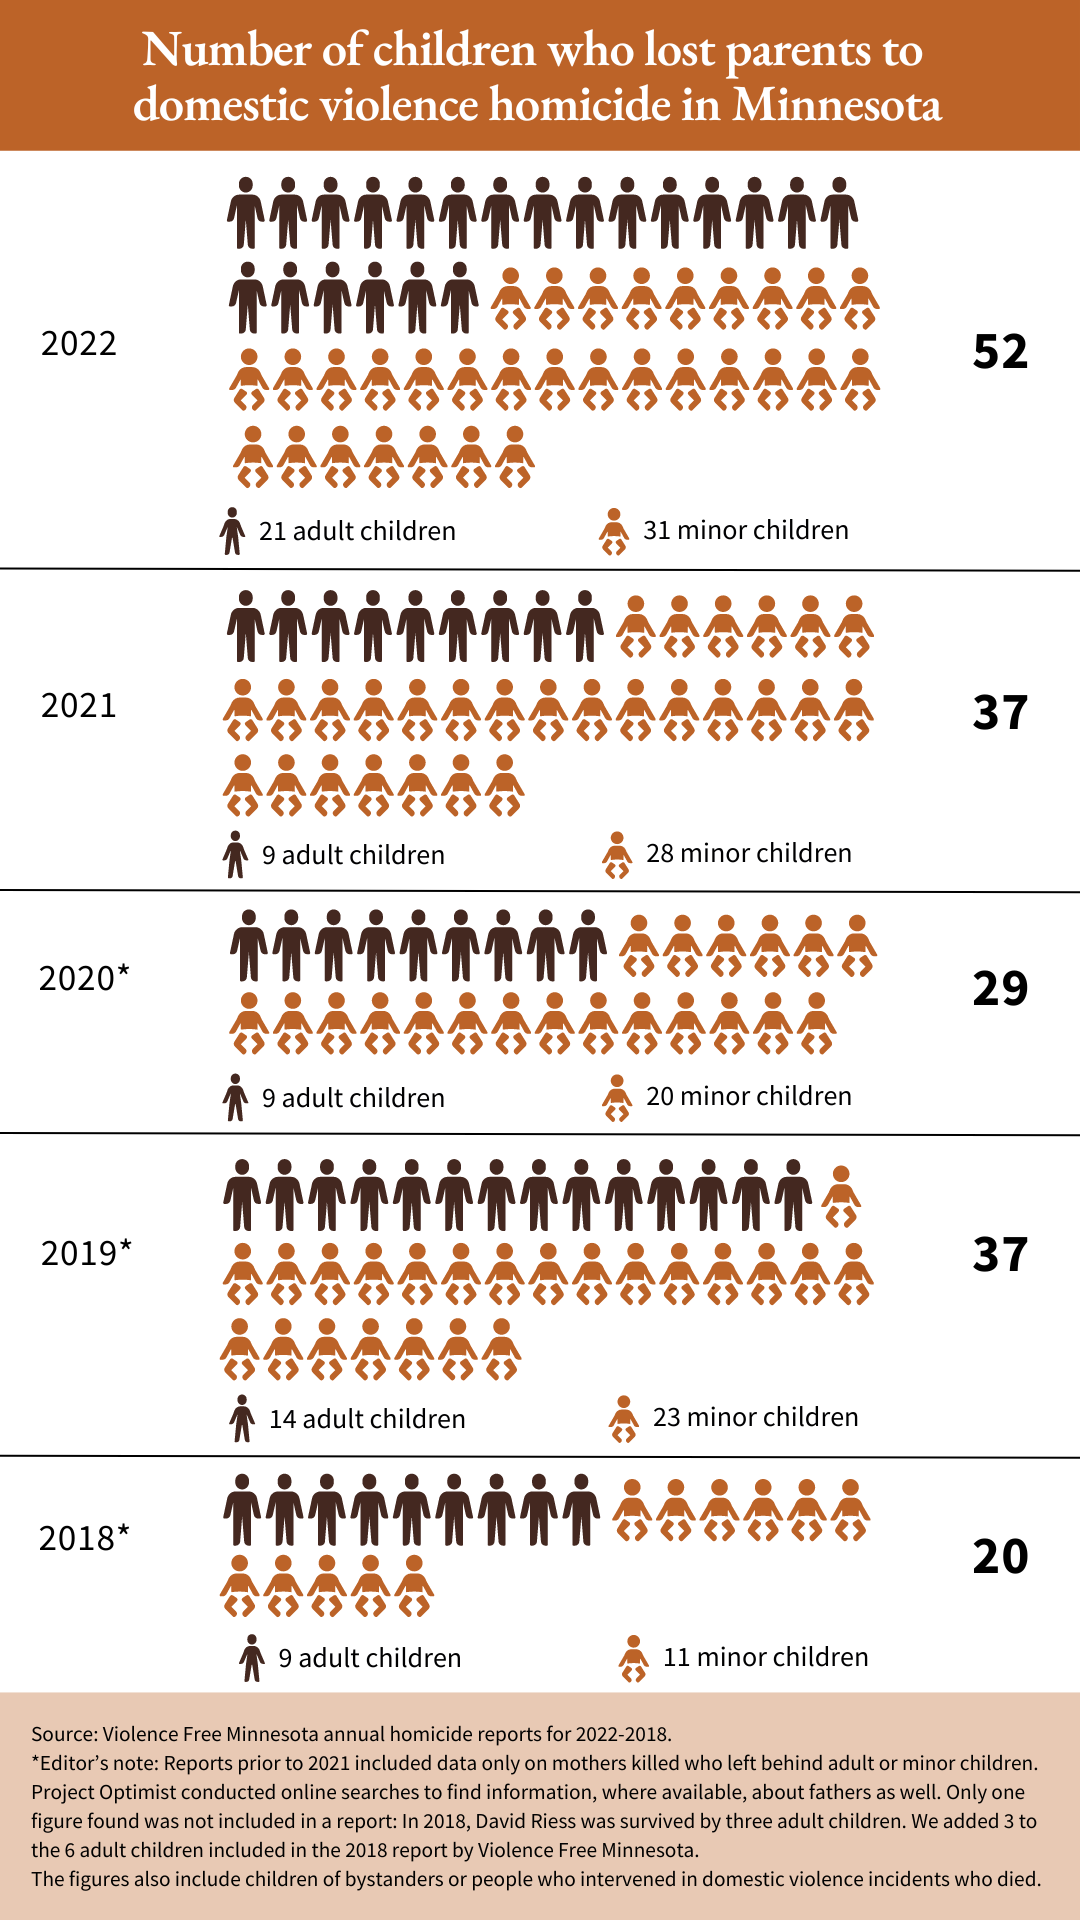 Graphic of children who lost parents to domestic violence in Minnesota from 2018-2022.